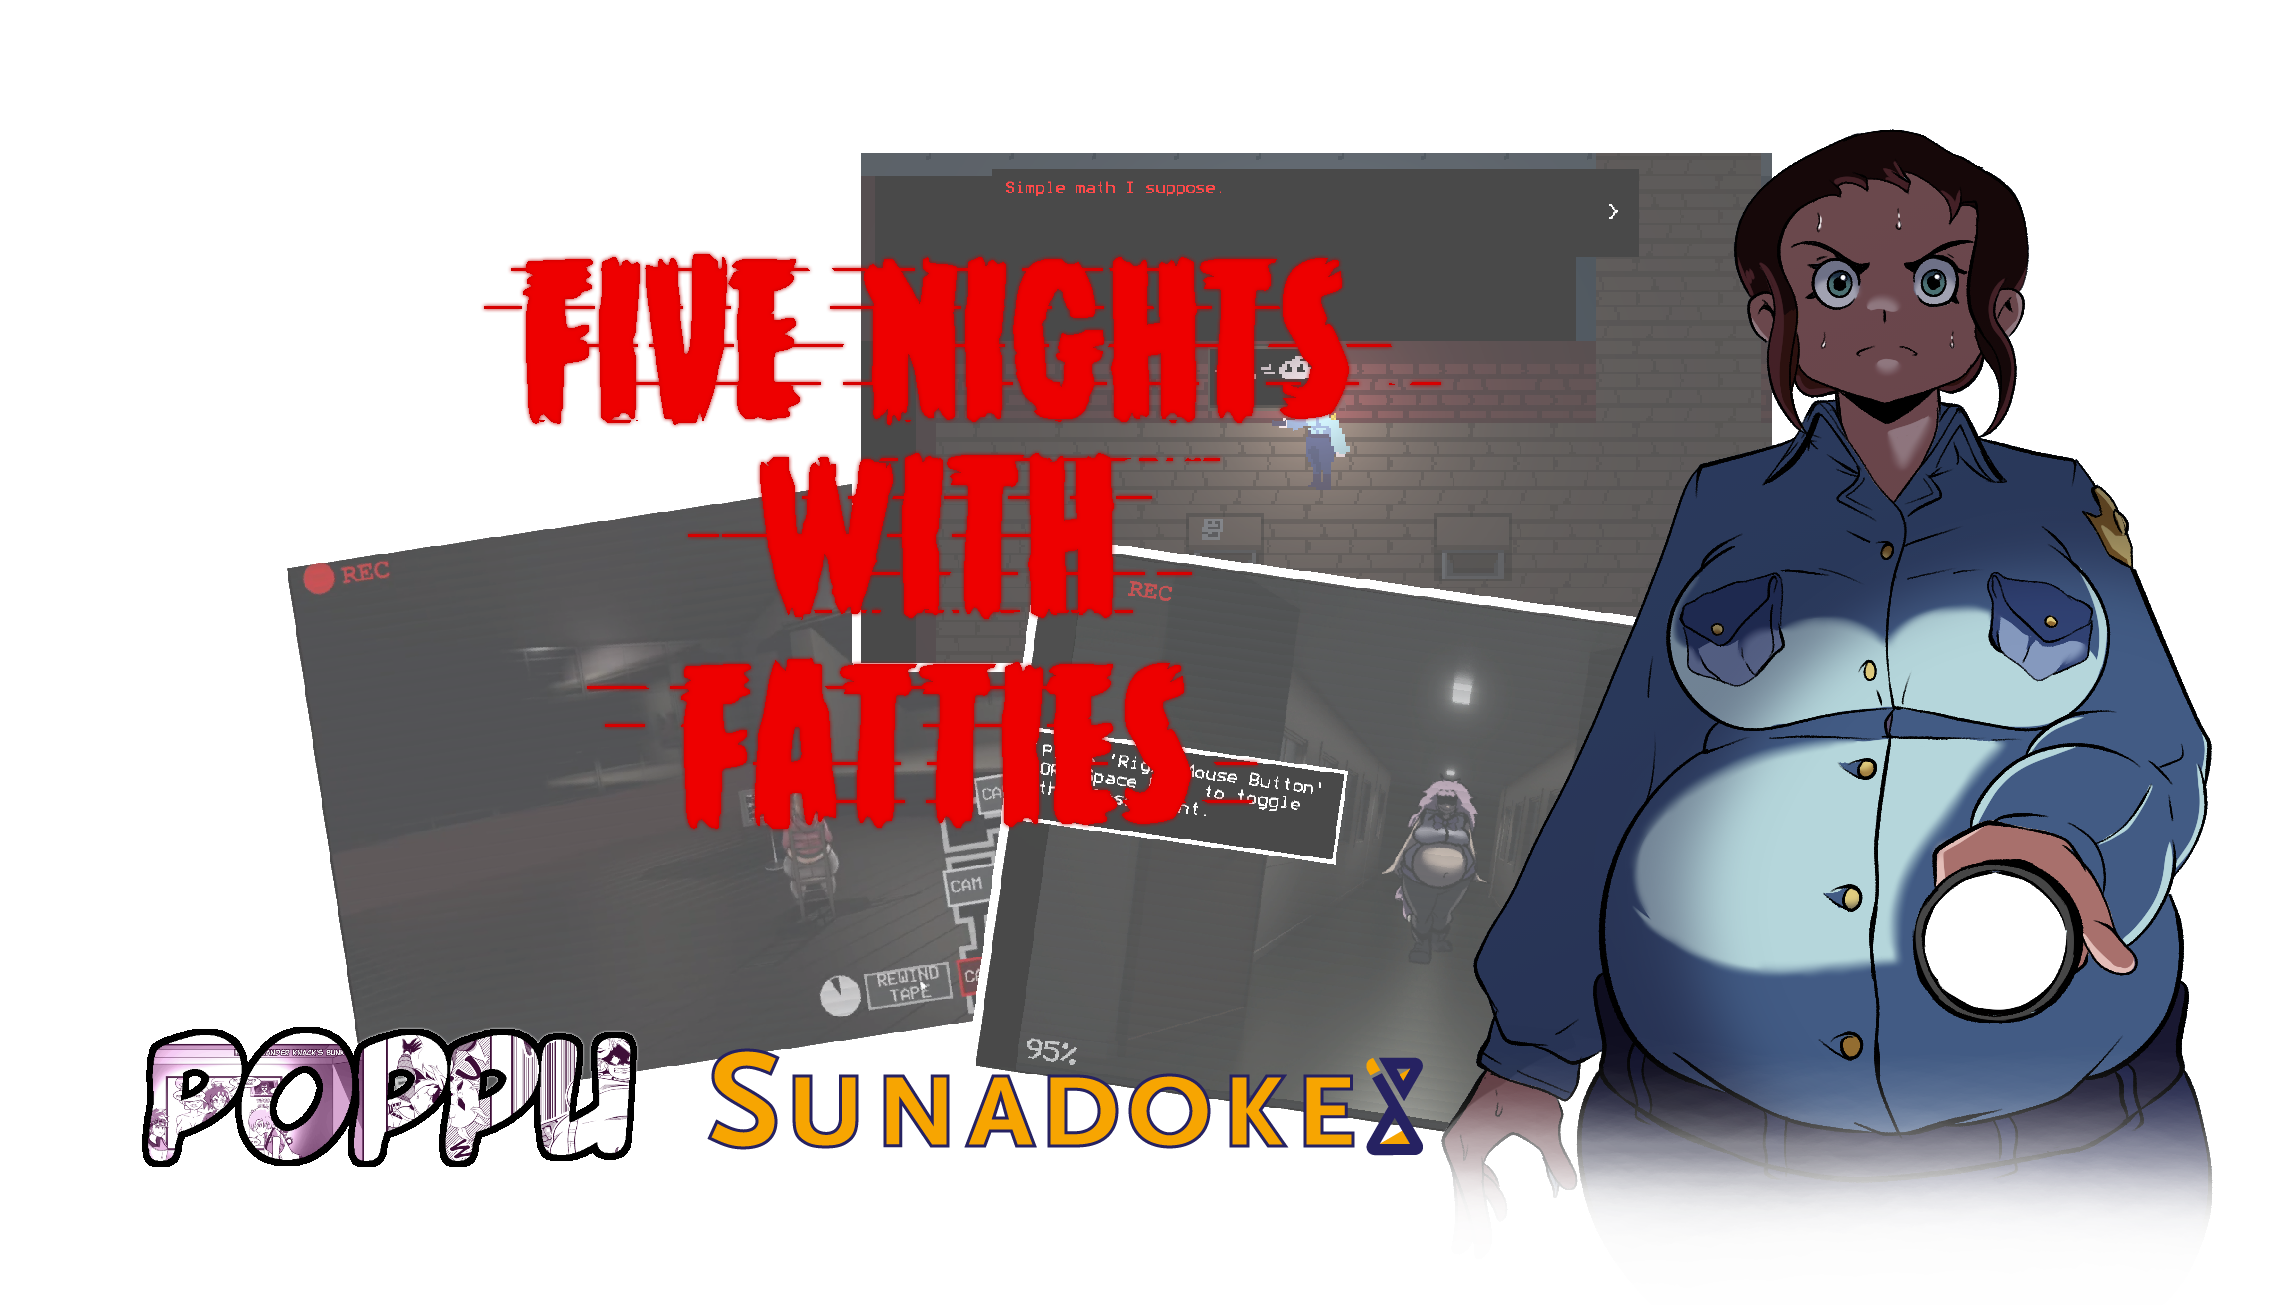 Five Nights With Fatties